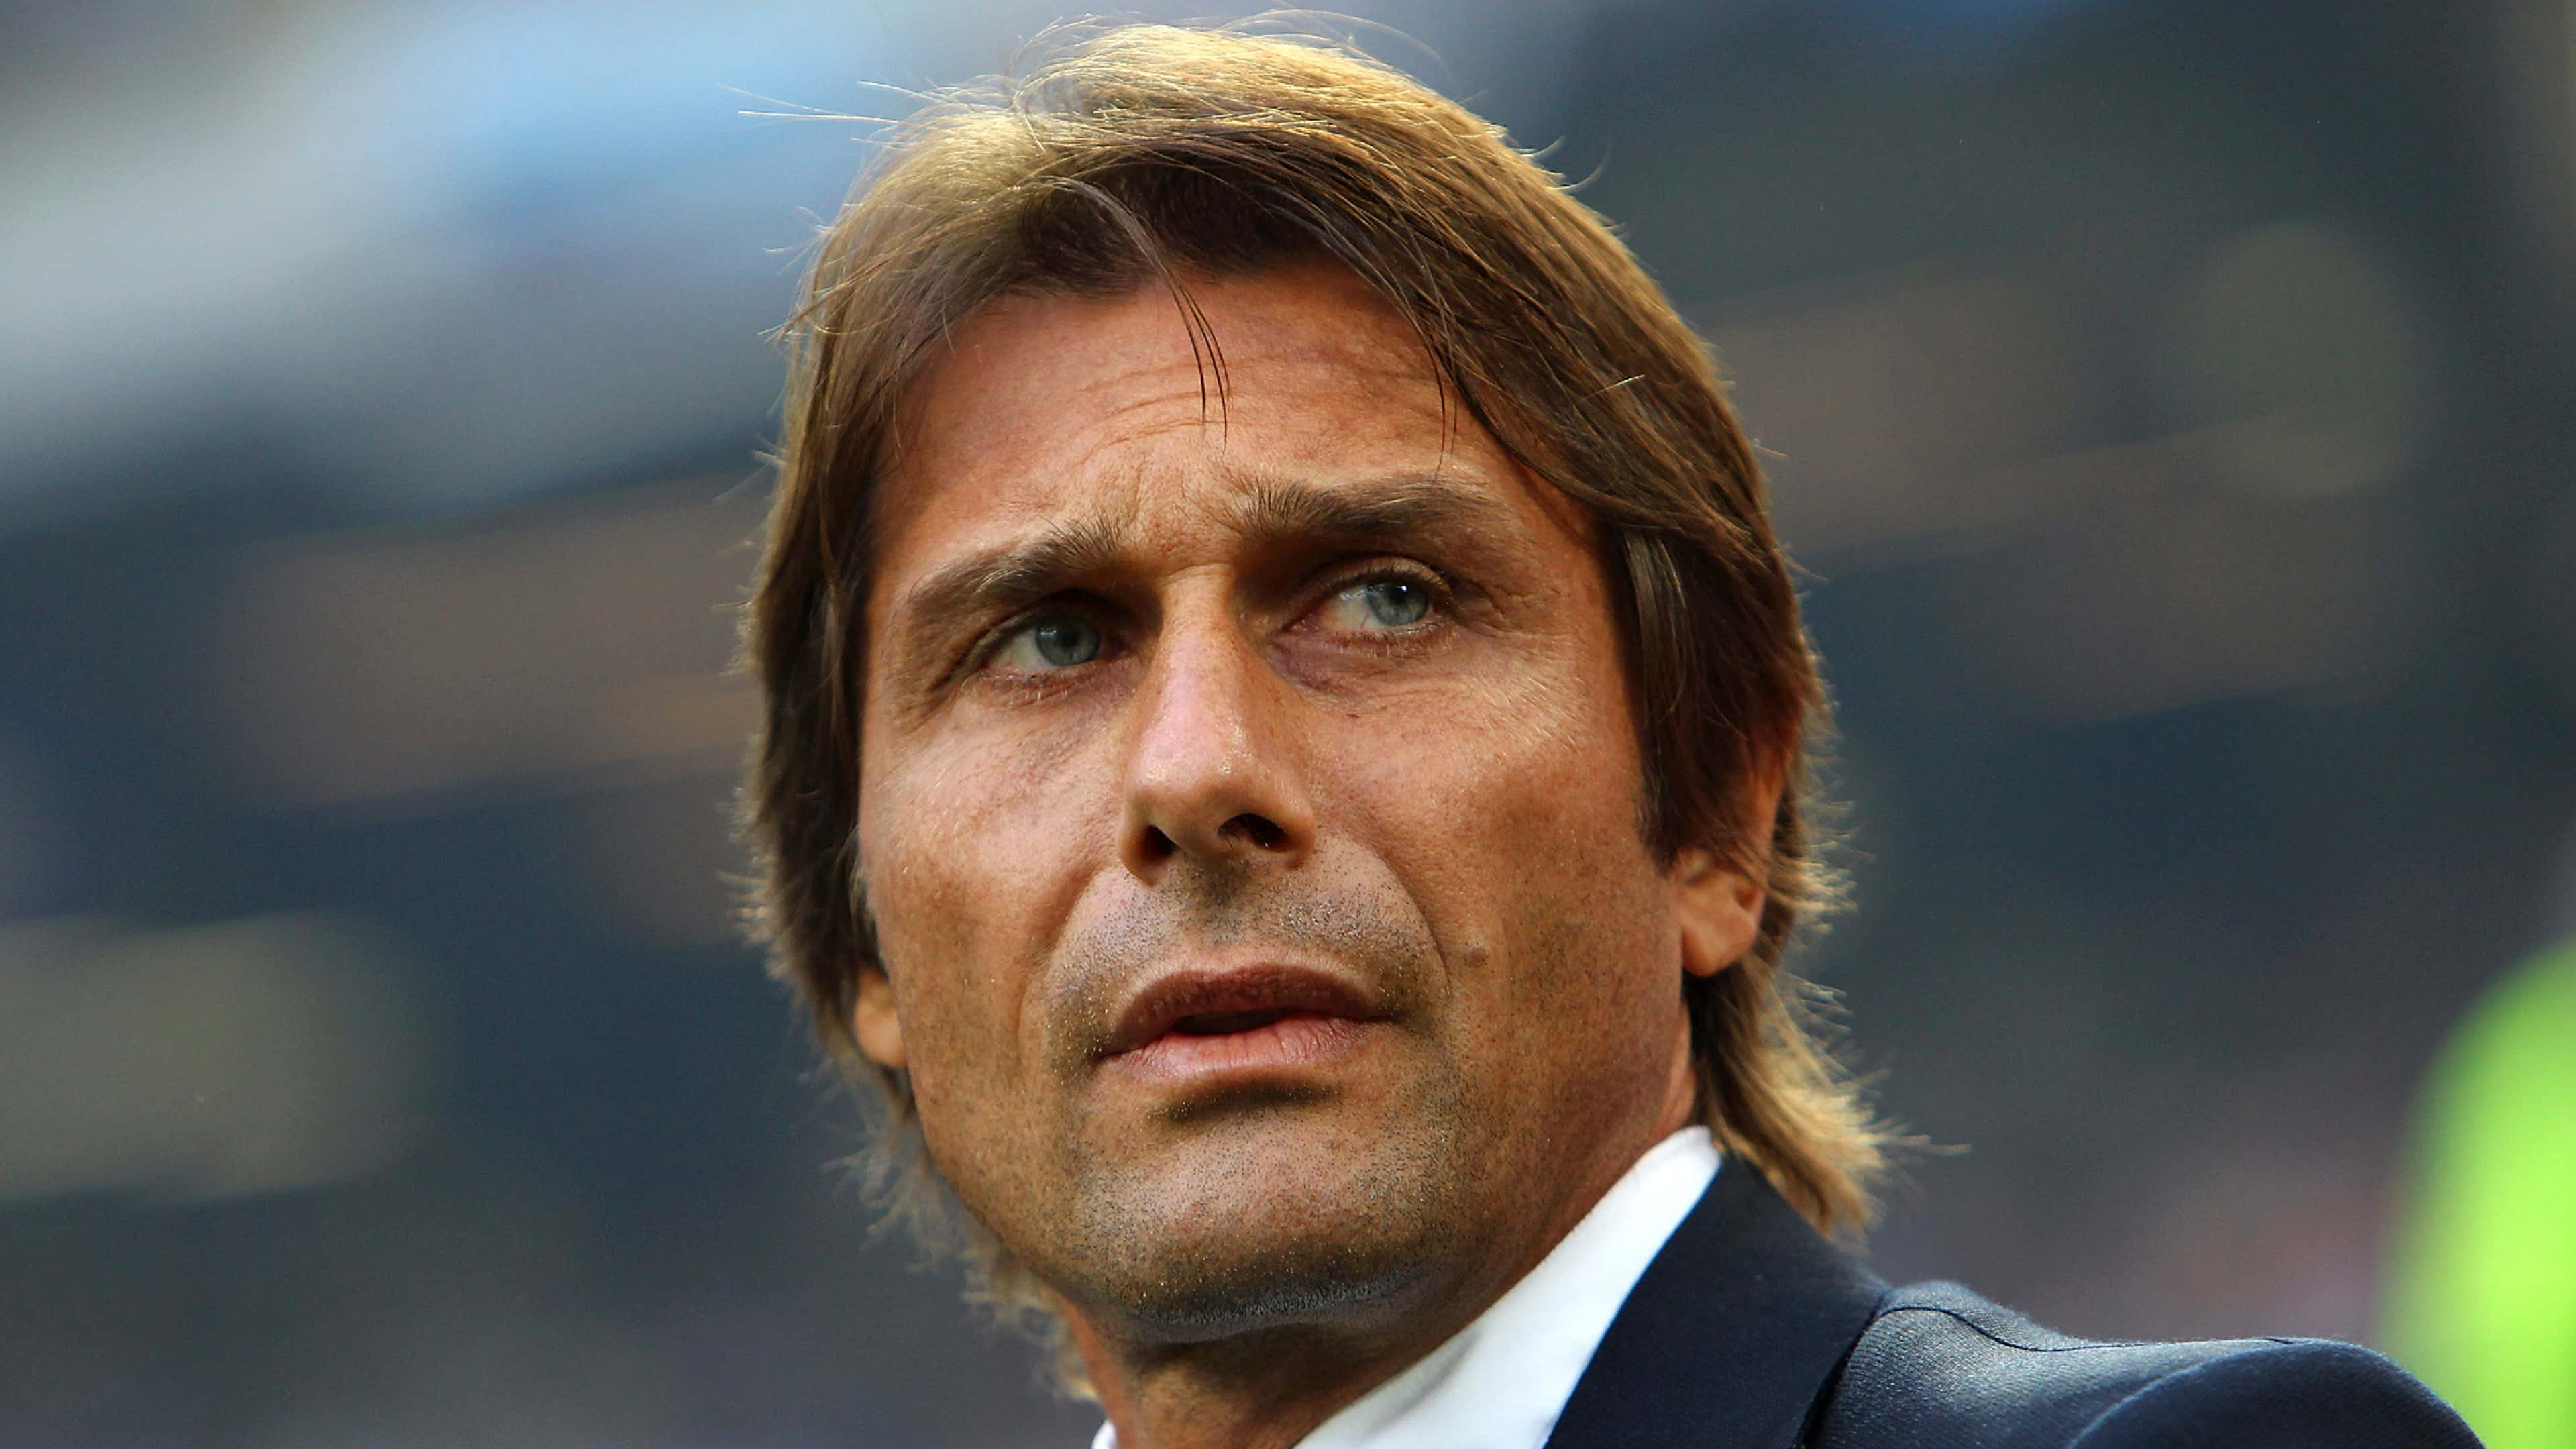 Conte leaves Inter over dispute with club owners following Serie A